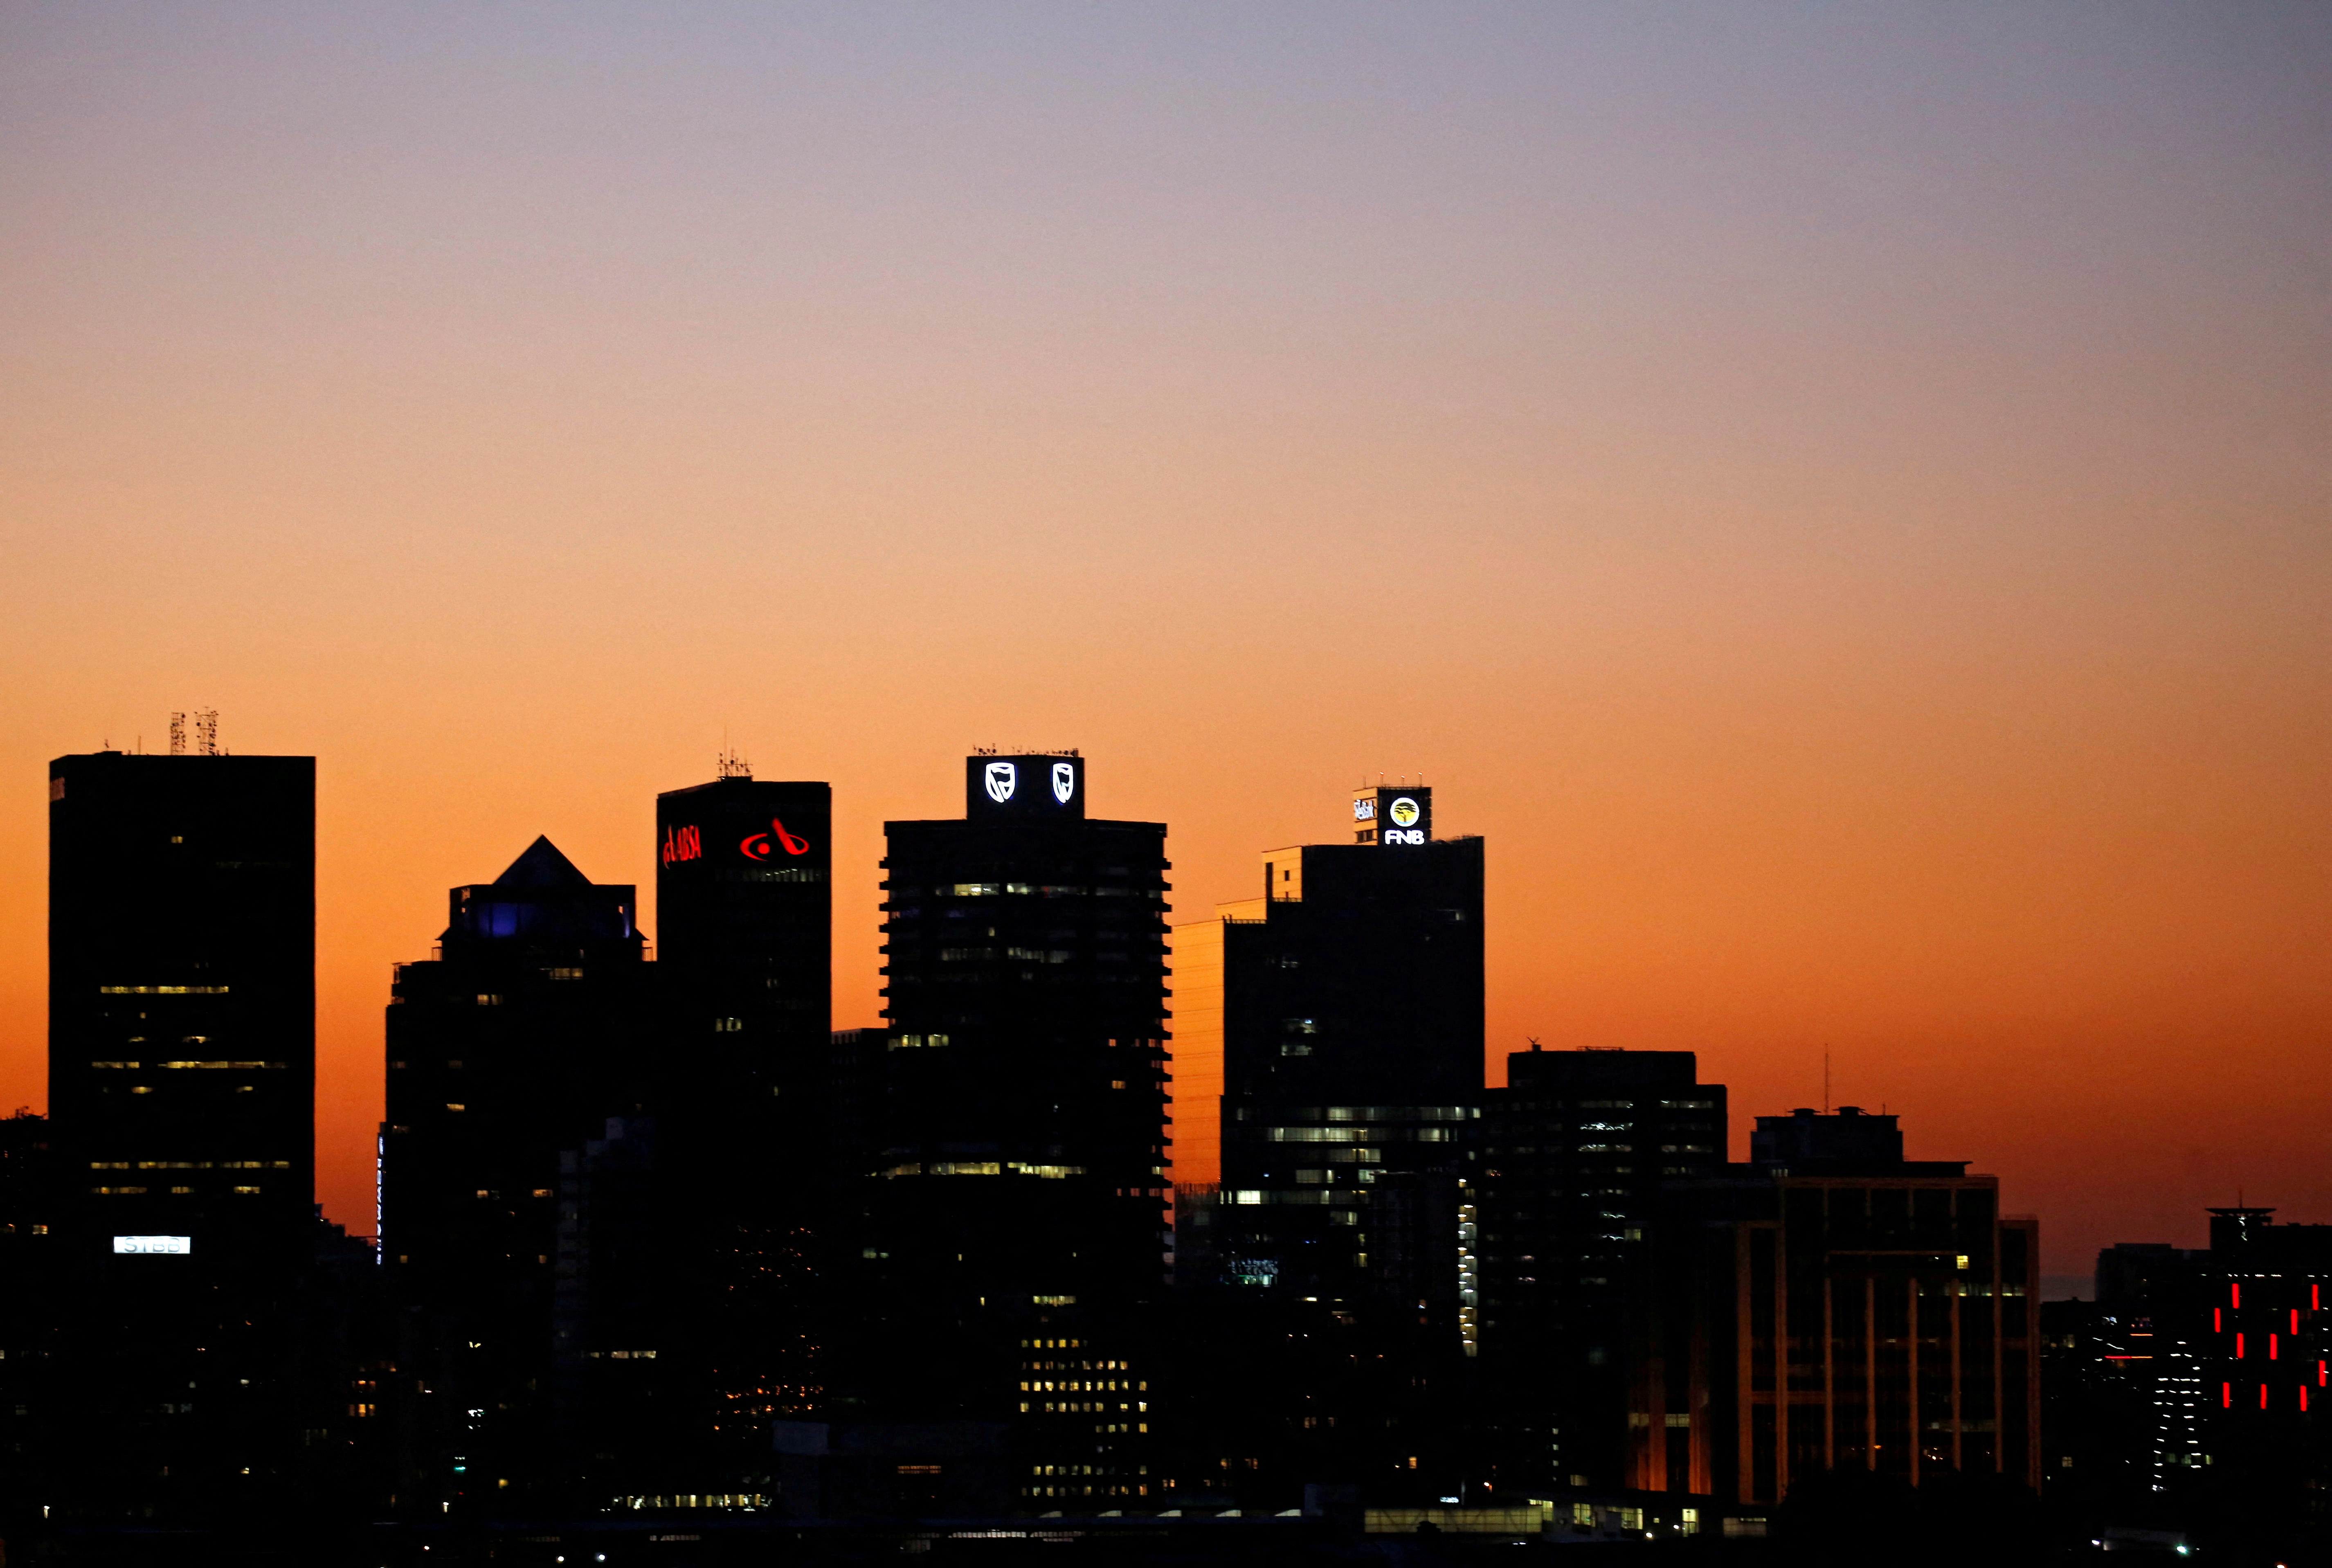 The buildings with the logos of three of South Africa's biggest banks, ABSA, Standard Bank and First National Bank are seen against the city skyline in Cape Town